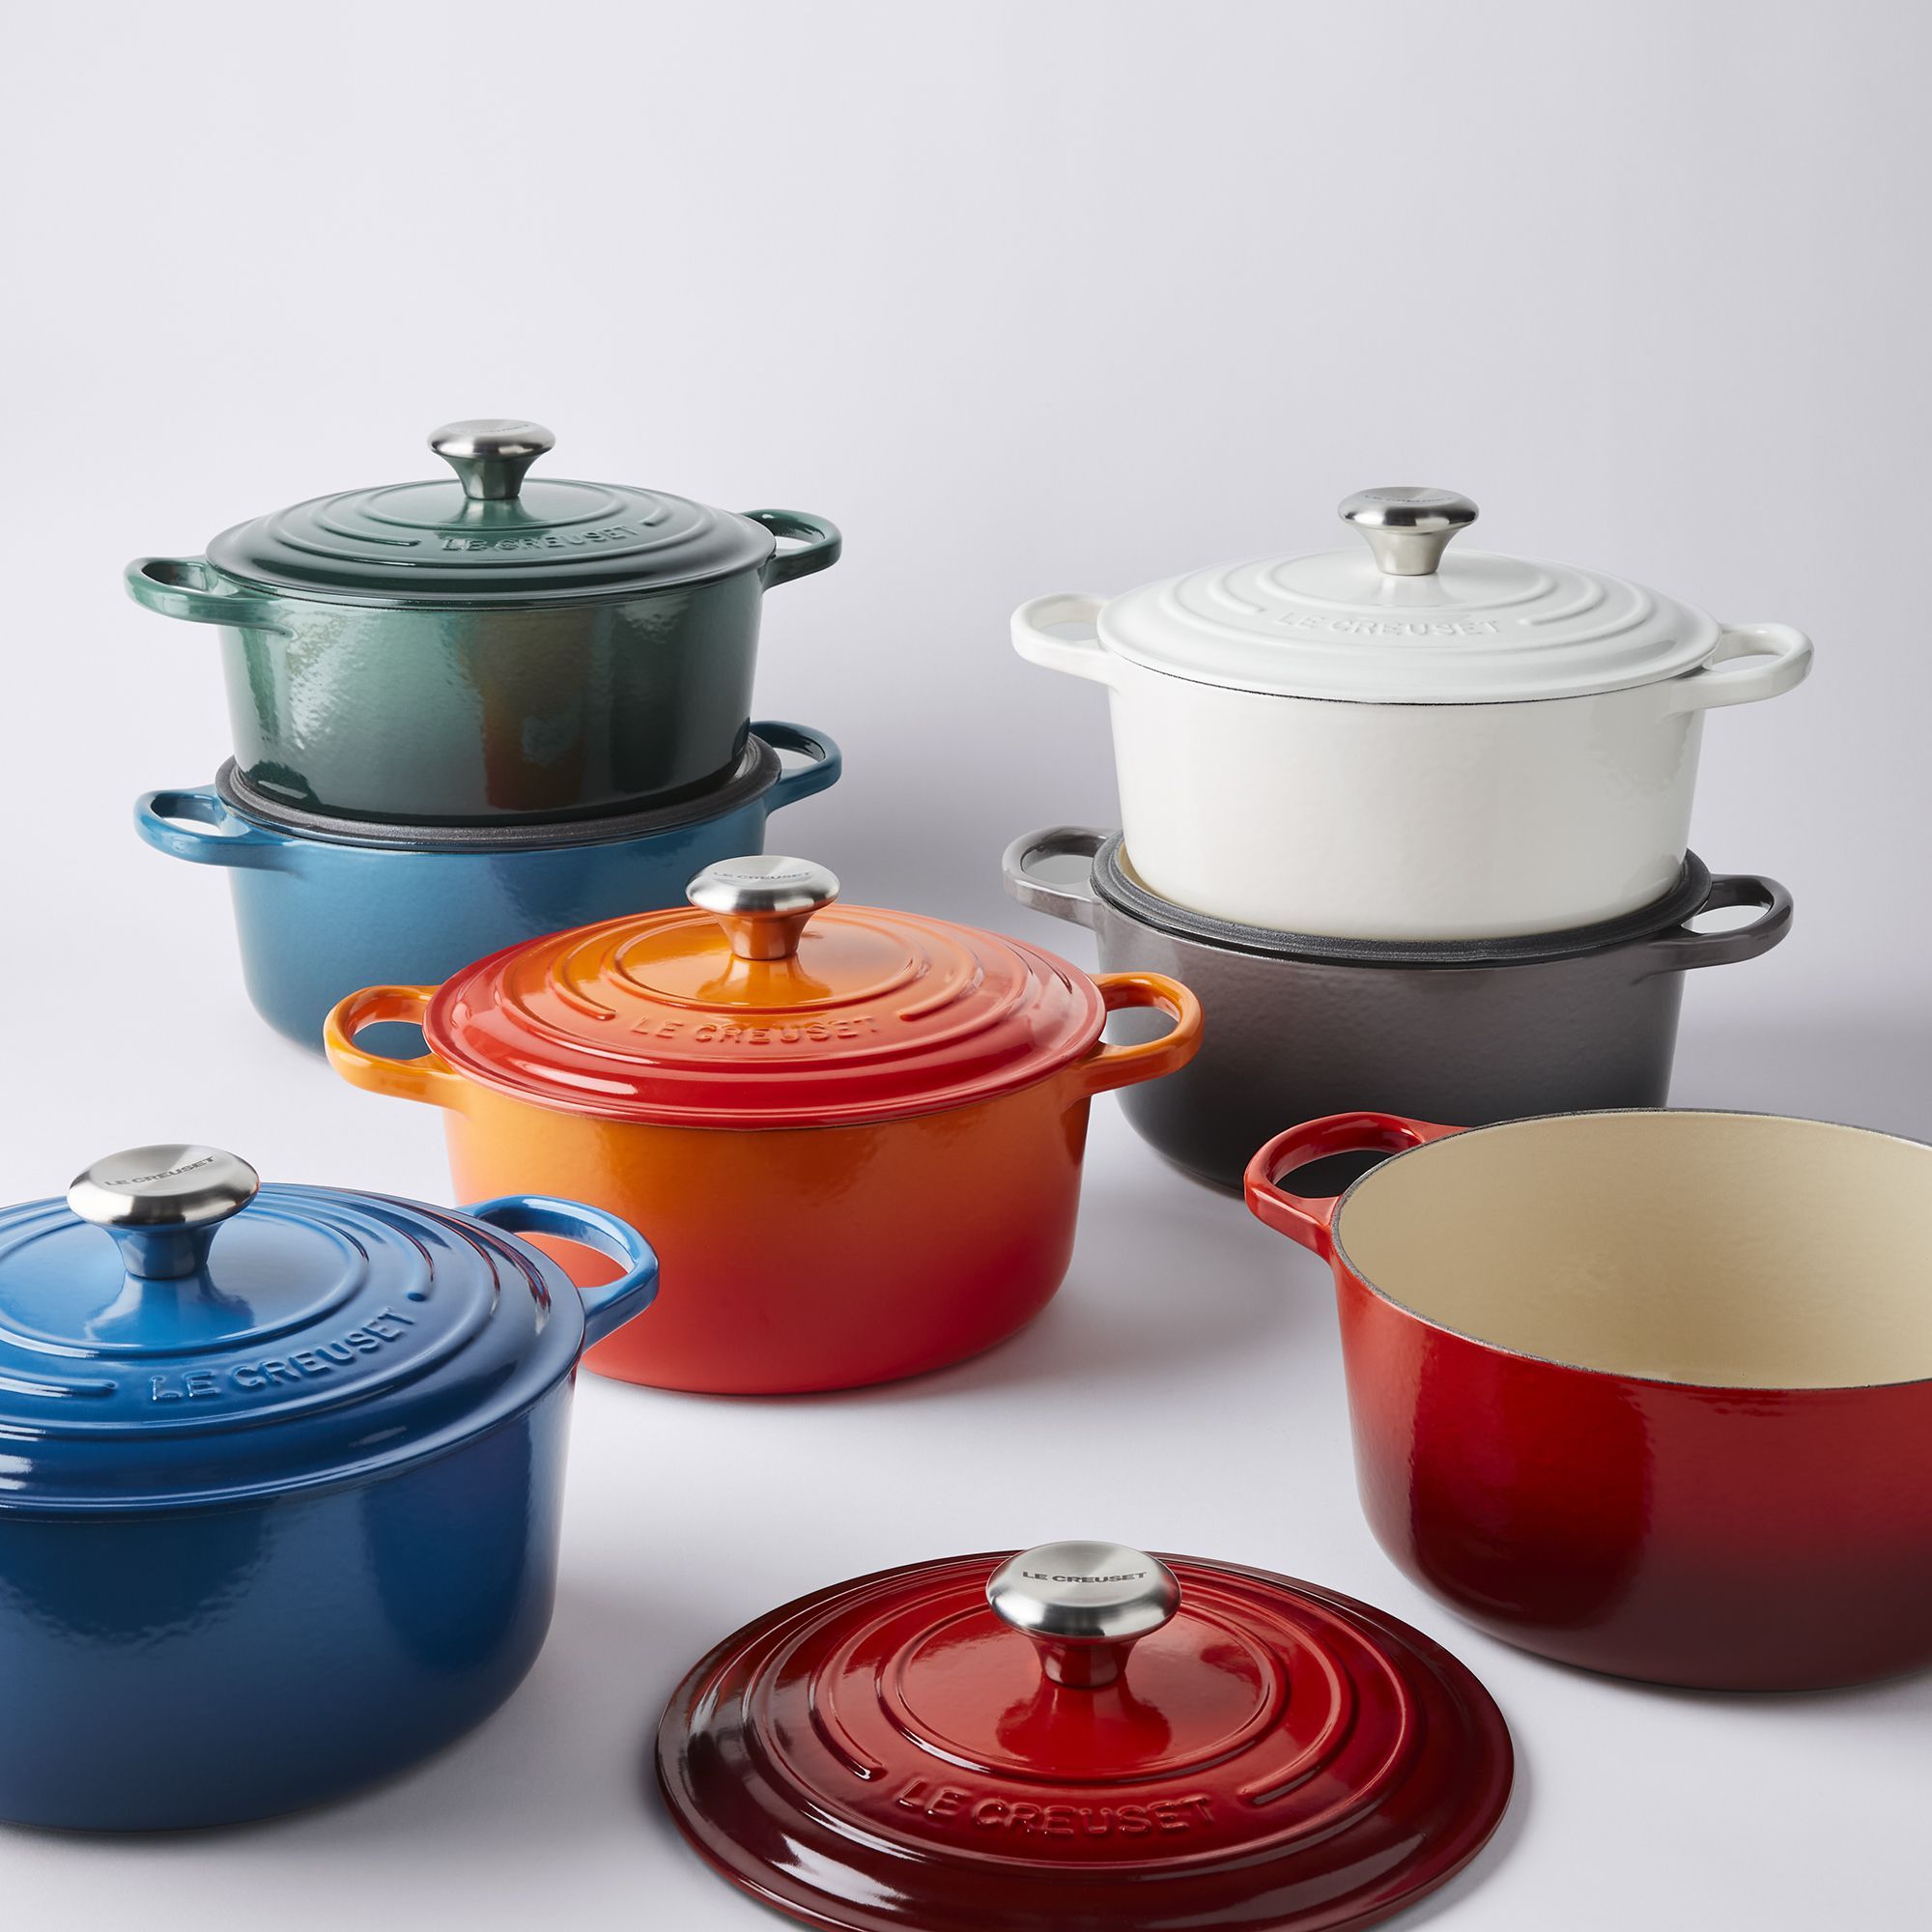 Le Creuset Is Discontinuing These Two Colors Forever